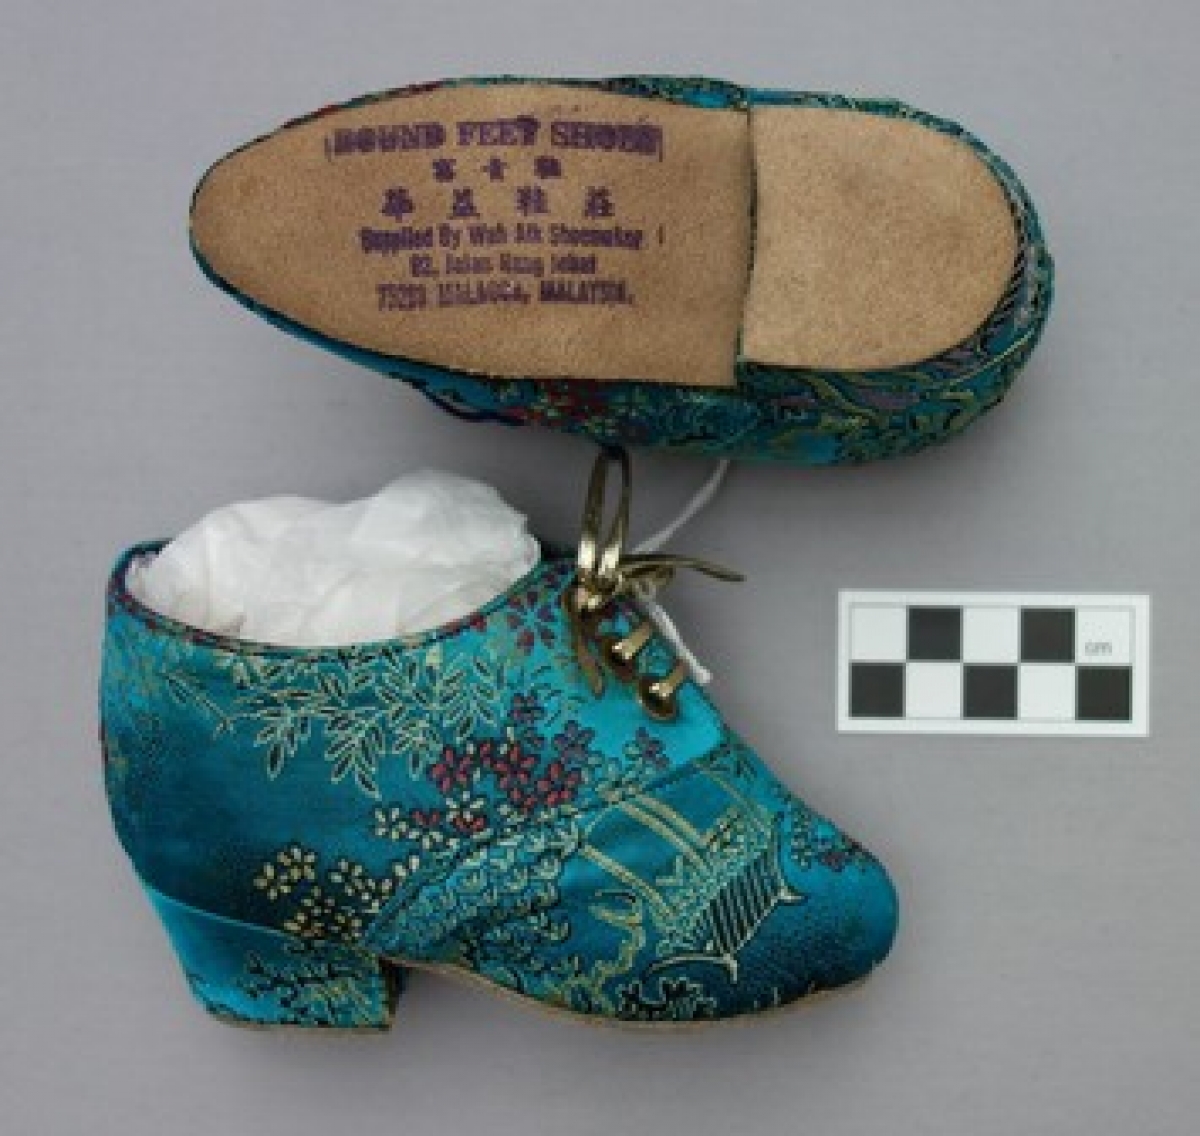 A pair of lotus shoes from Malaysia (late 20th century).